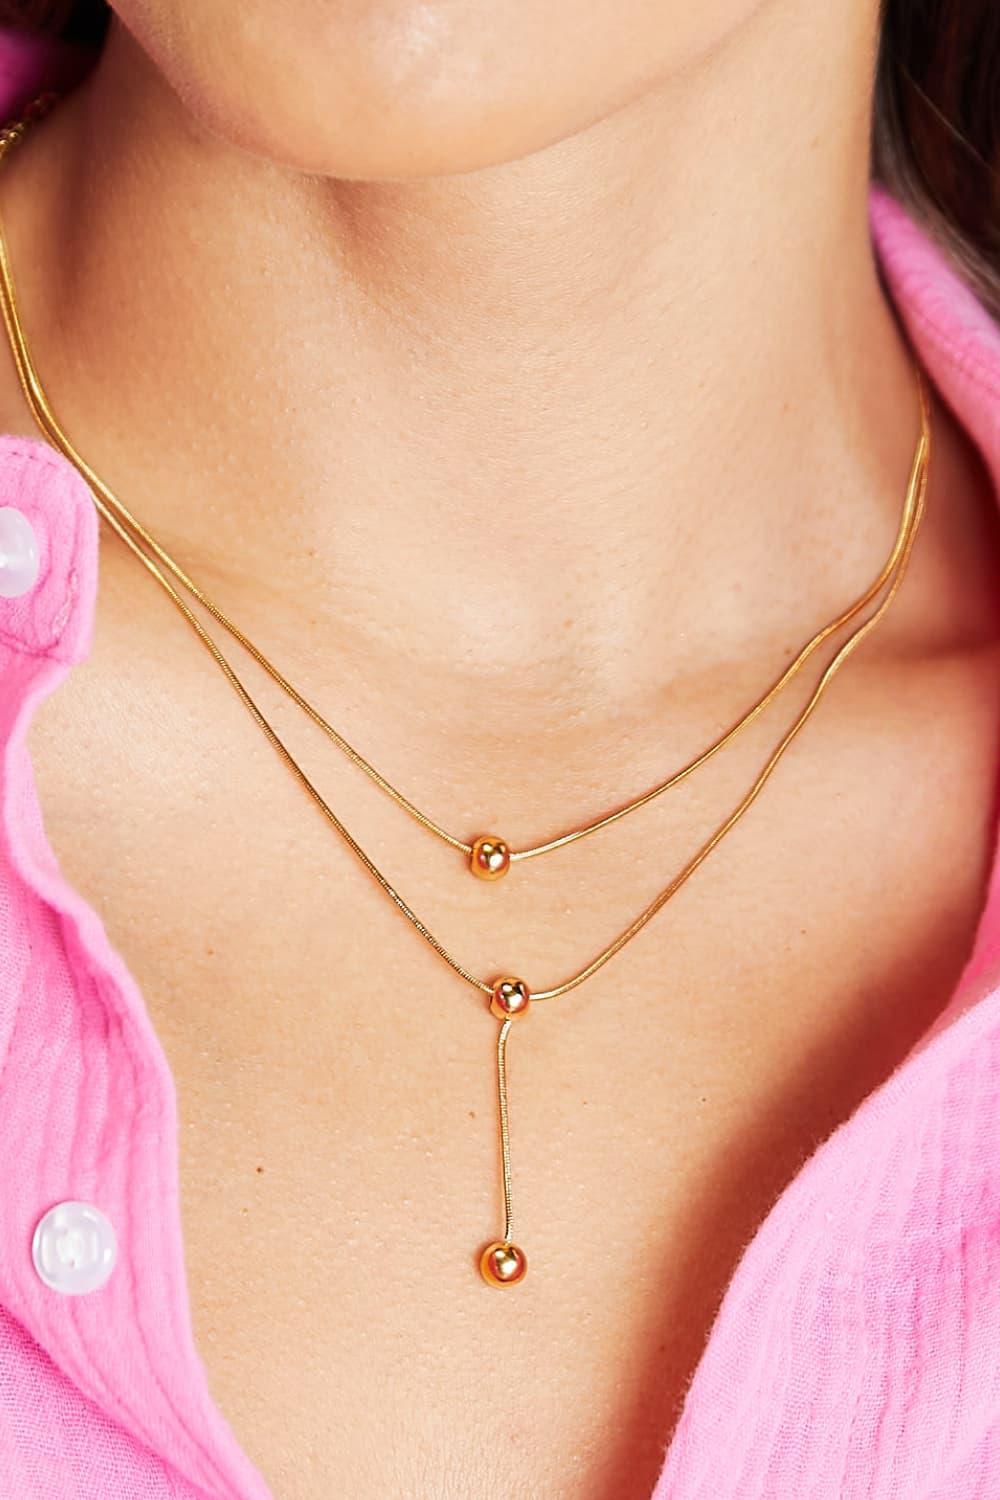 Adored Drop Ball Double-Layered Necklace - Lab Fashion, Home & Health